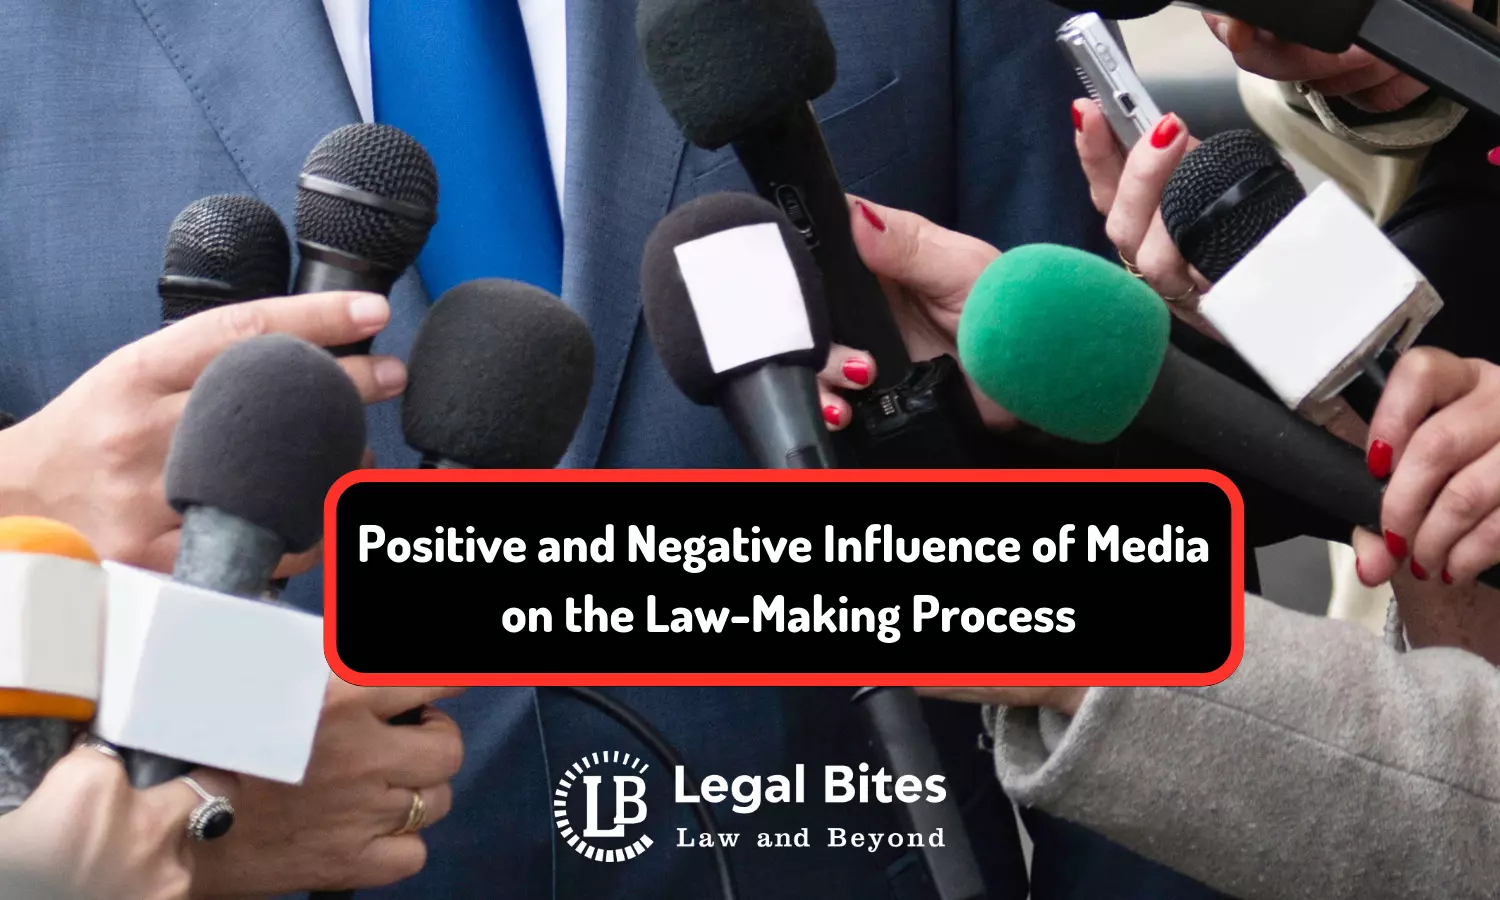 Positive and Negative Influence of Media on the Law-Making Process